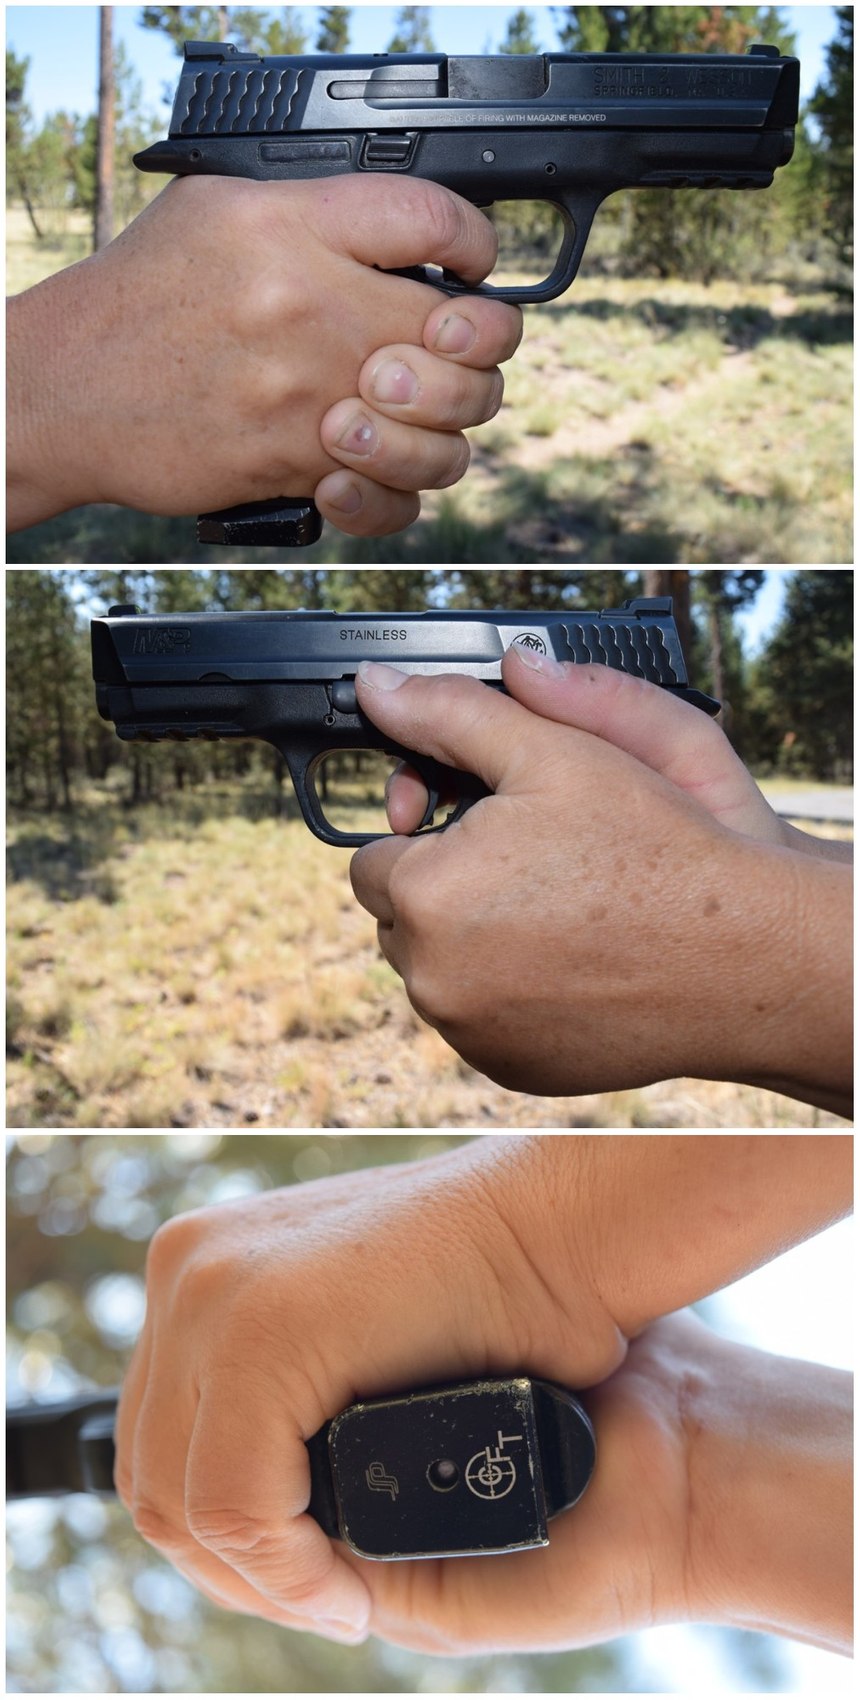 When you examine the grip from the bottom of the pistol looking up, there shouldn’t be a gap on the grip of the gun between the thumbs or the heel of either hand. The goal is to obtain full 360° coverage around the entire grip of the gun. If there’s any gap in the grip, the hole will allow the energy from recoil to travel down that direction causing a perceived increase in recoil and more movement of the sights while firing.